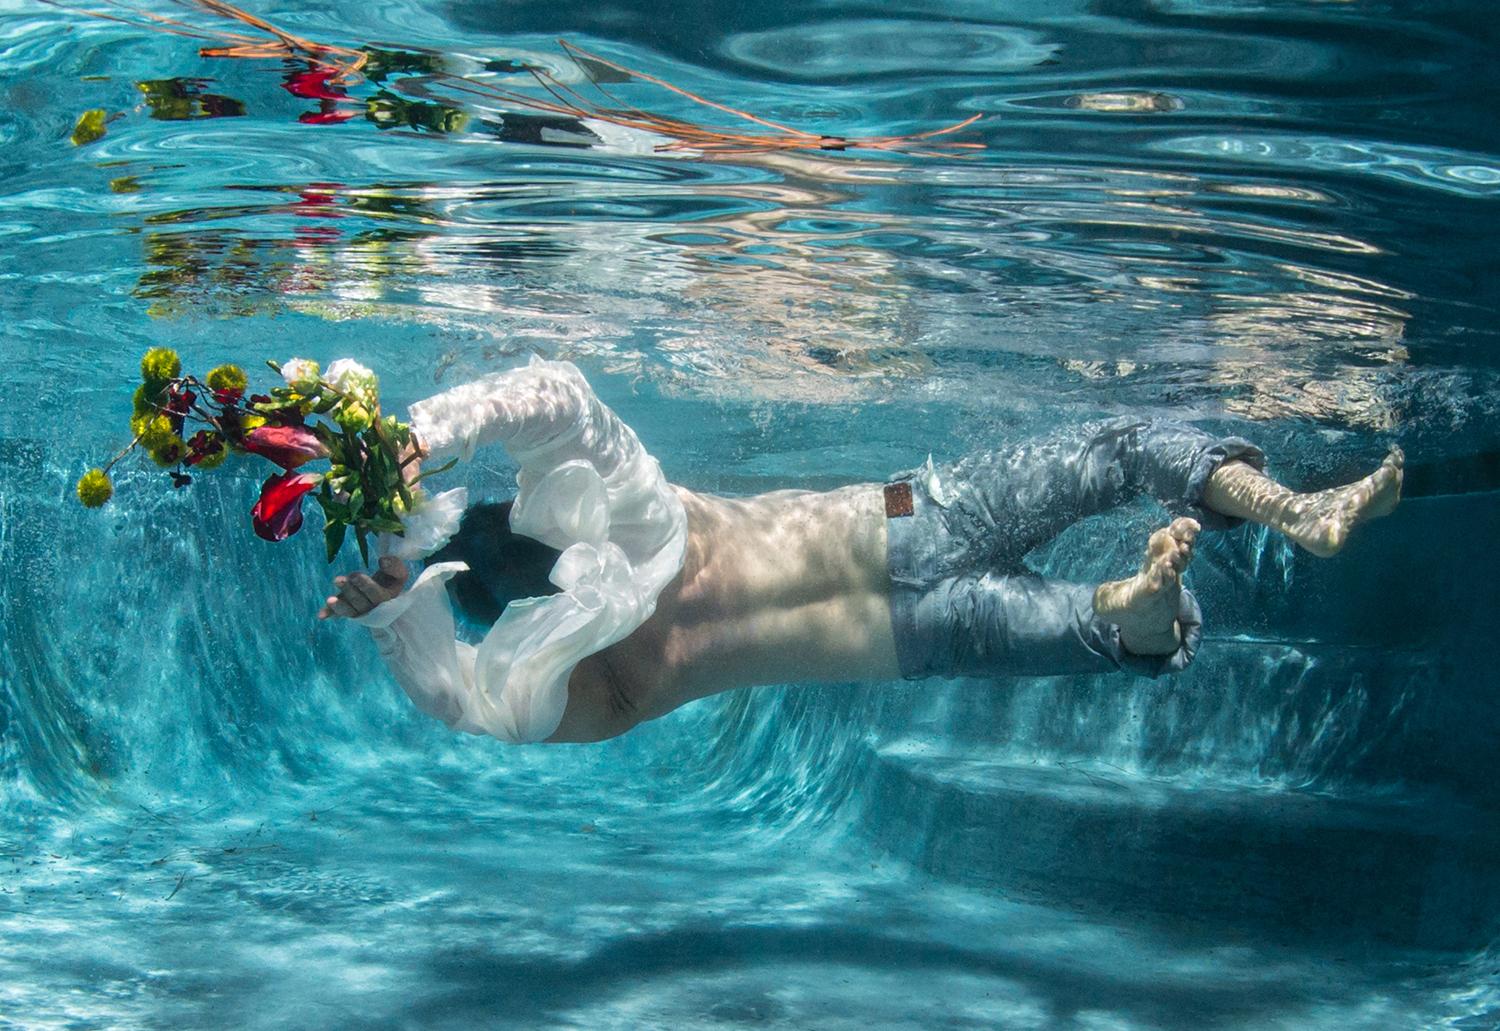 Cold Song III - underwater photograph - archival pigment print - Photorealist Photograph by Alex Sher